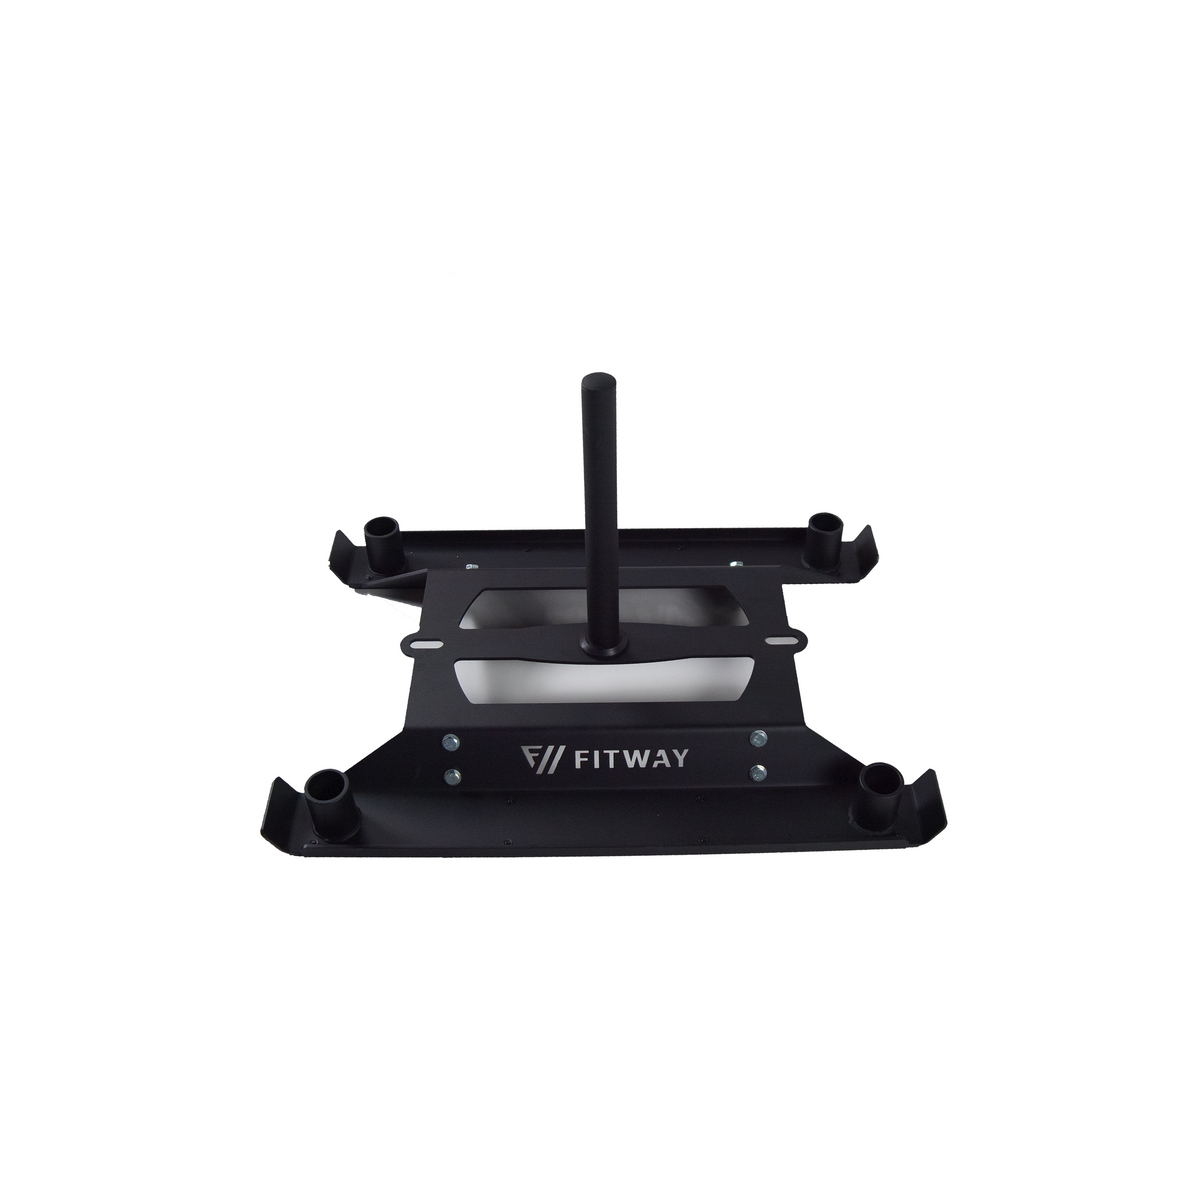 FITWAY Deluxe Power Sled